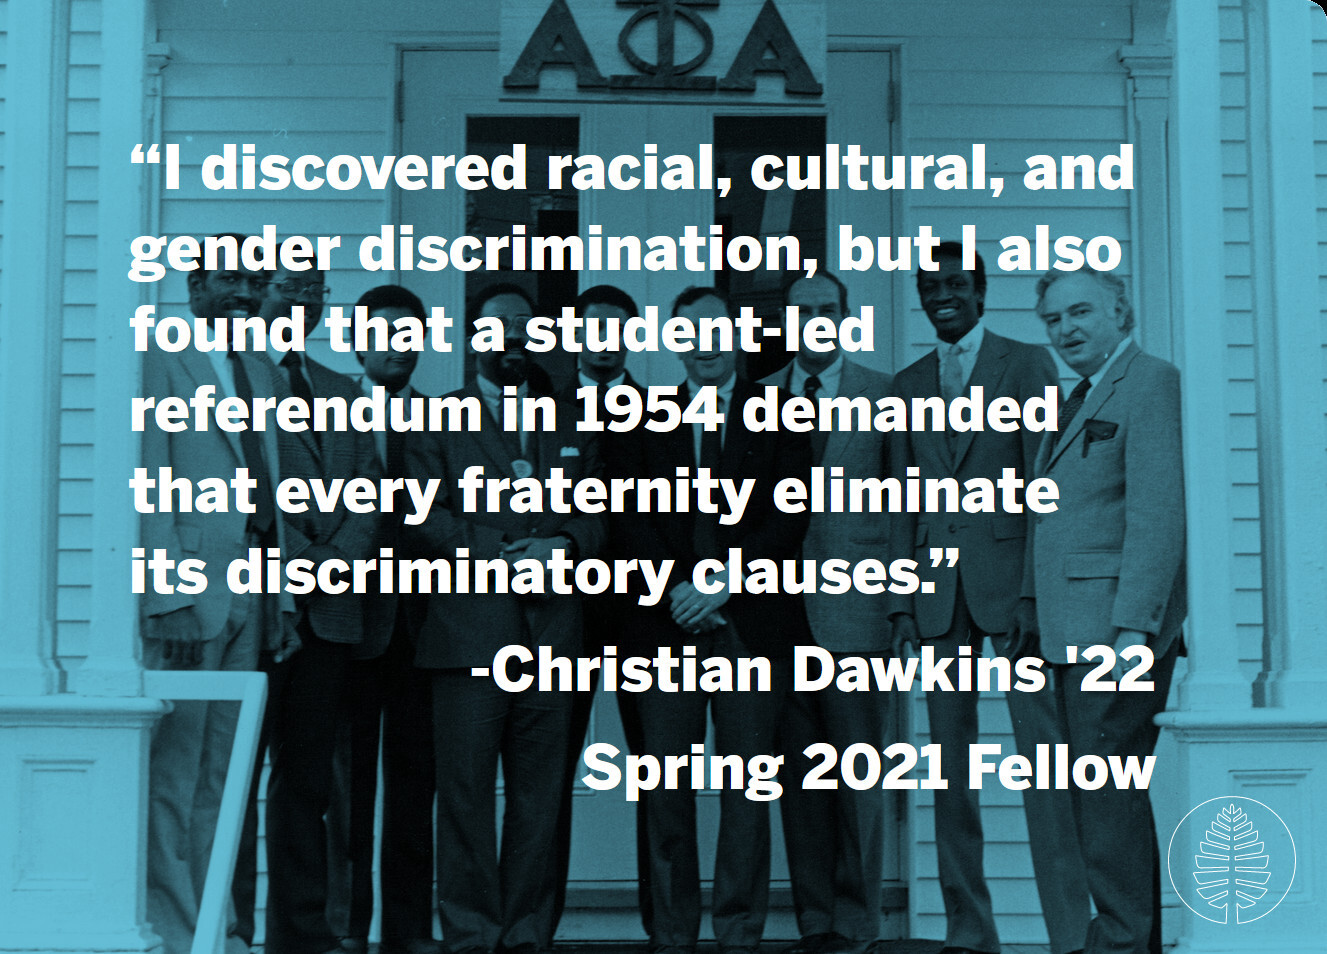 A quote with a background photo of Alpha Phi Alpha, Dartmouth's first historically Black fraternity, posing with President Kemeny. "I discovered racial, cultural, and gender discrimination, but I also found that a student-led referendum in 1954 demanded that every fraternity eliminate its discriminatory clauses." -Christian Dawkins '22, Spring 2021 Fellow